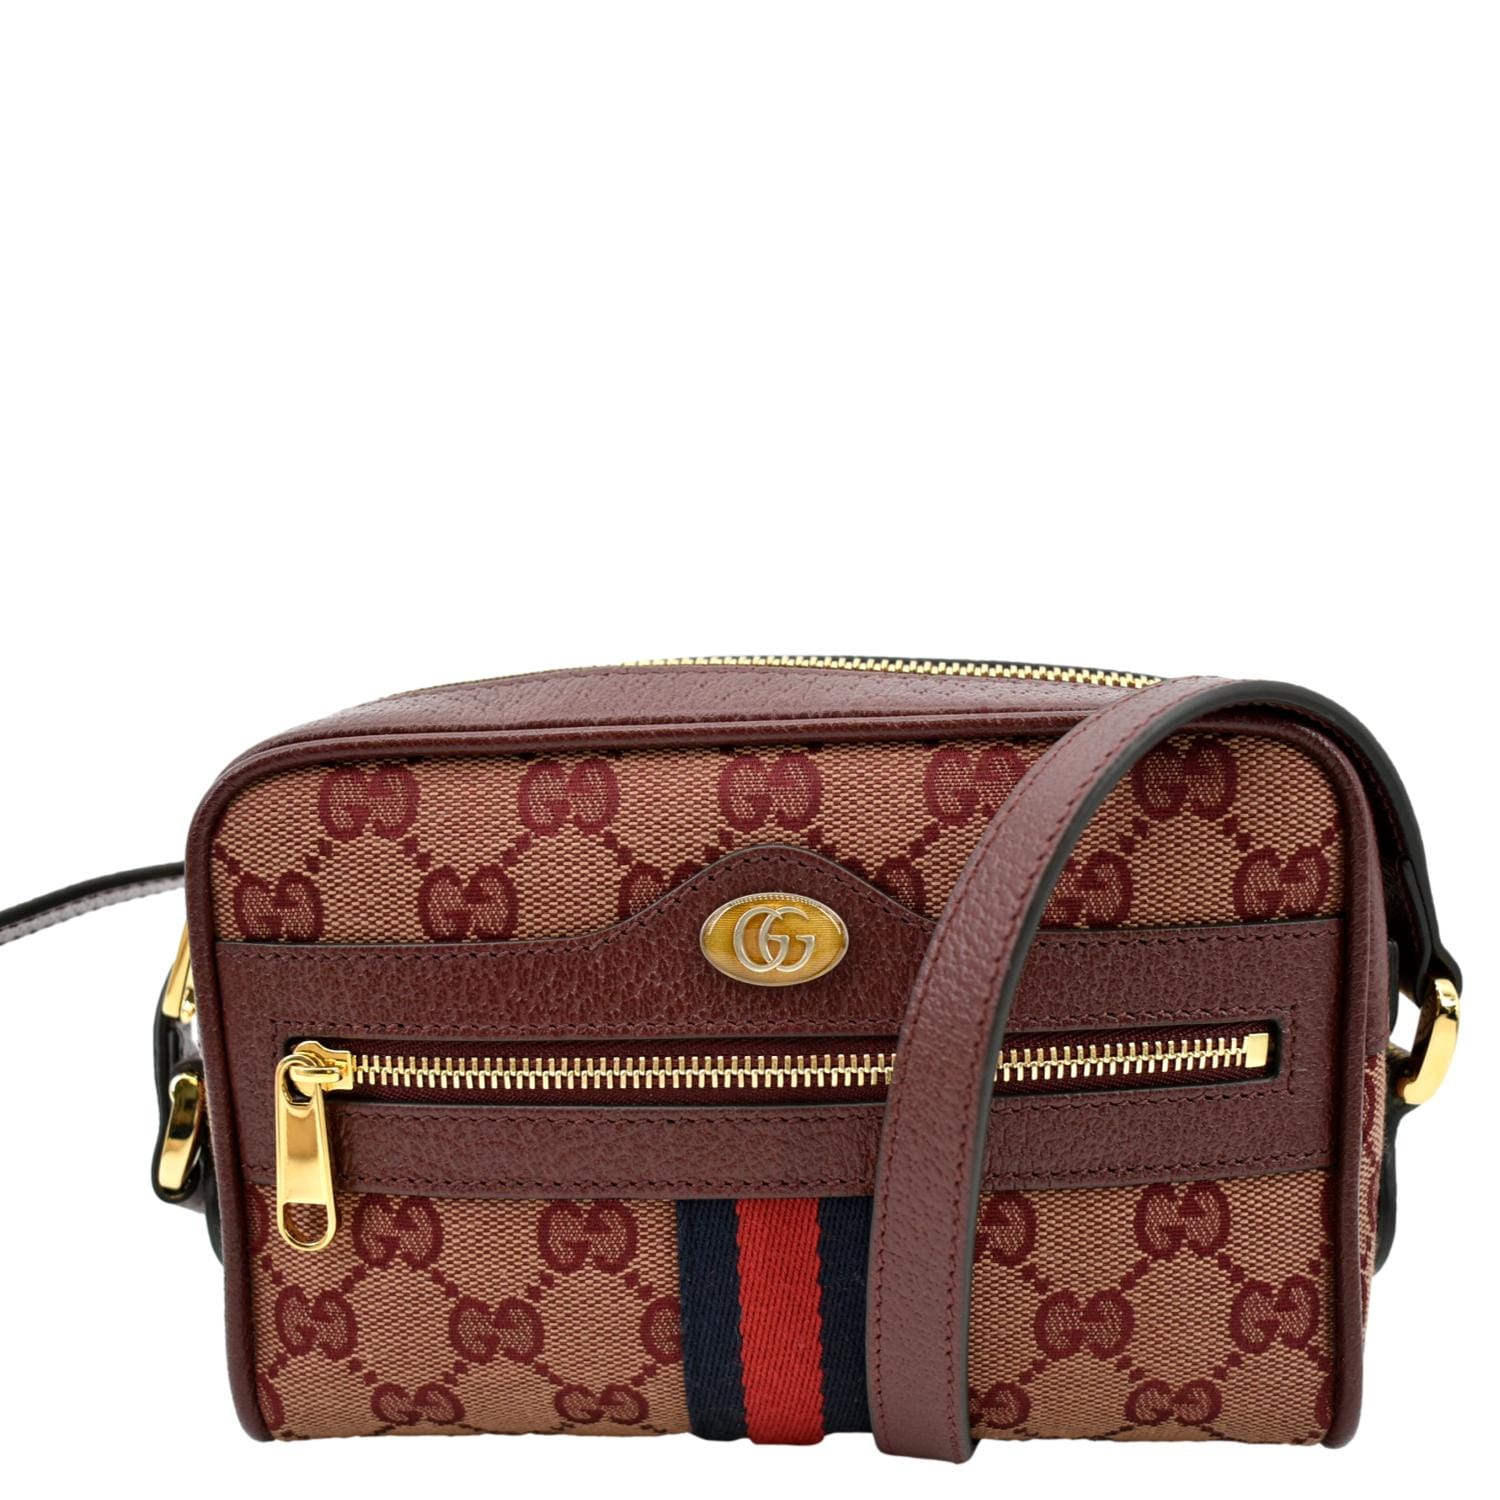 Converting the Gucci Ophidia Pouch into a crossbody 